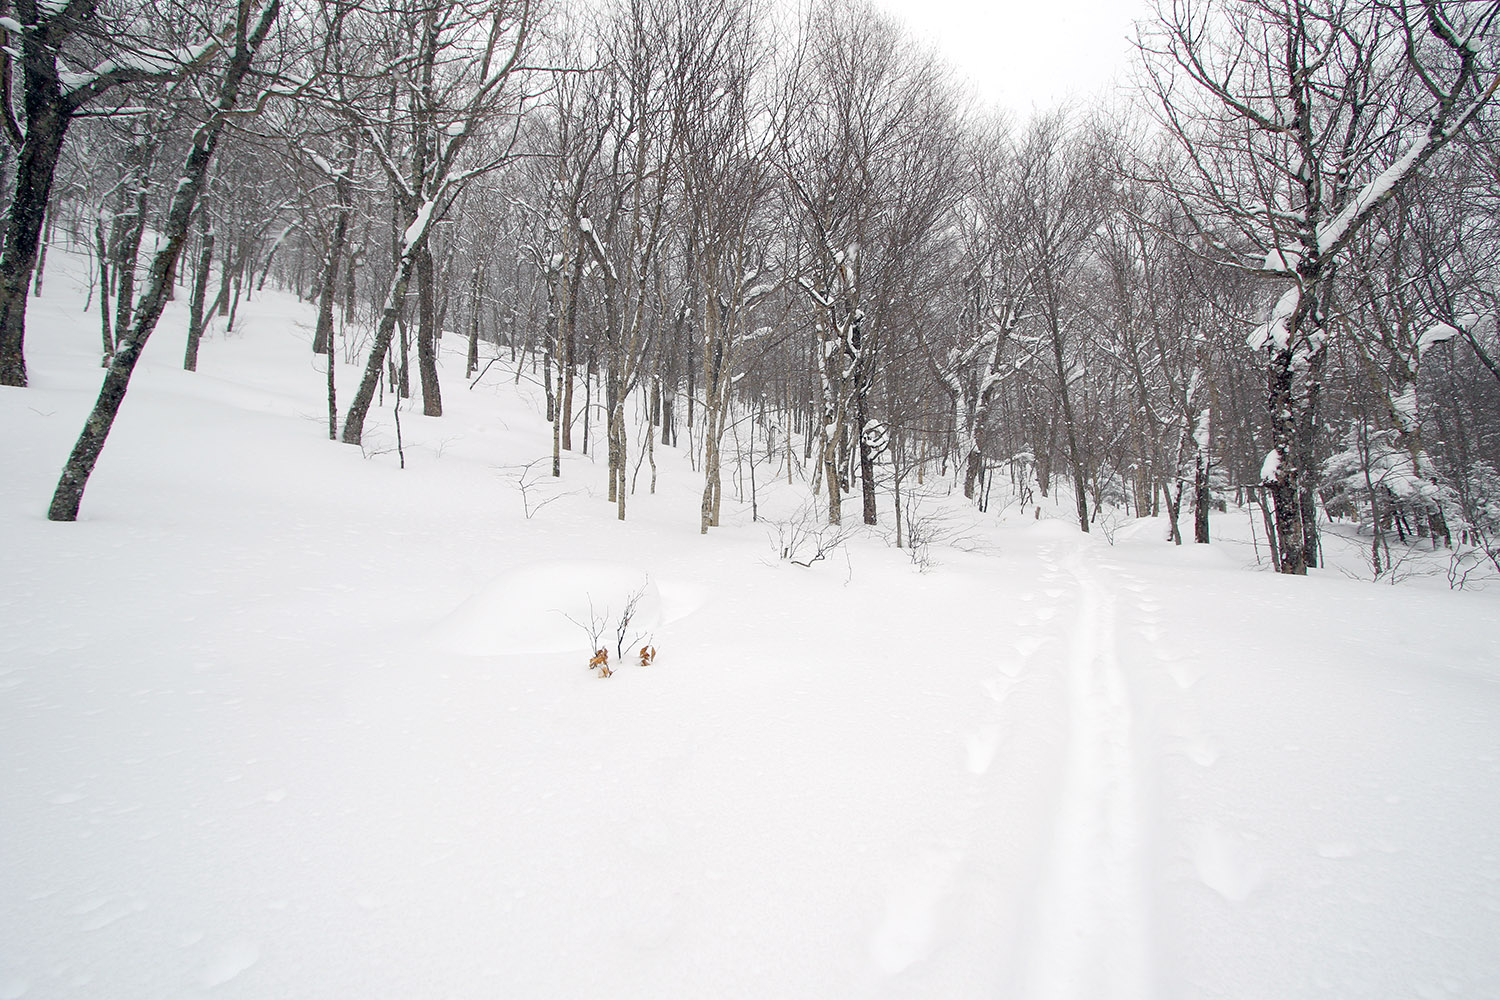 An image showing a skin track through Big Jay Basin near Jay Peak Ski Resort in Vermont, with large areas of nicely spaced trees for glade skiing in powder